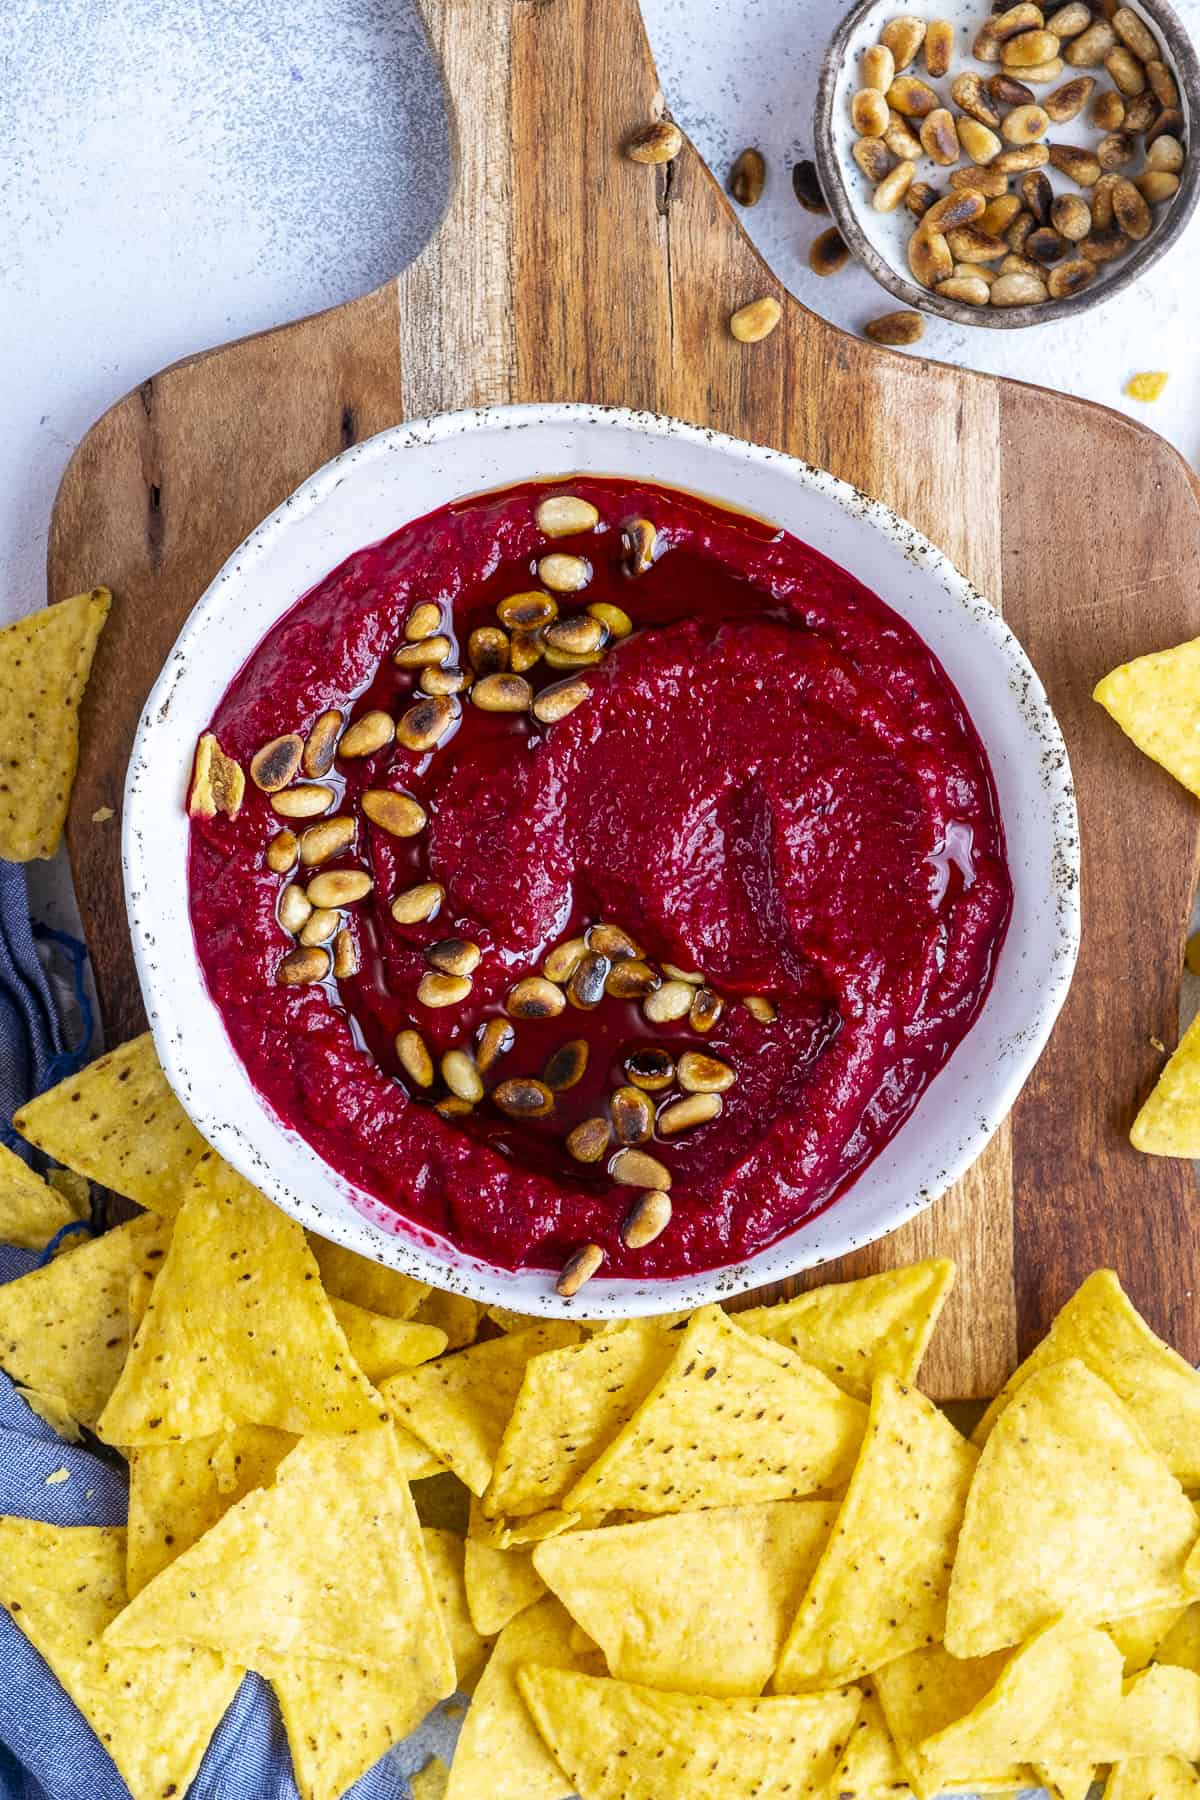 Beetroot dip garnished with pine nuts in a bowl served on a wooden board with chips.